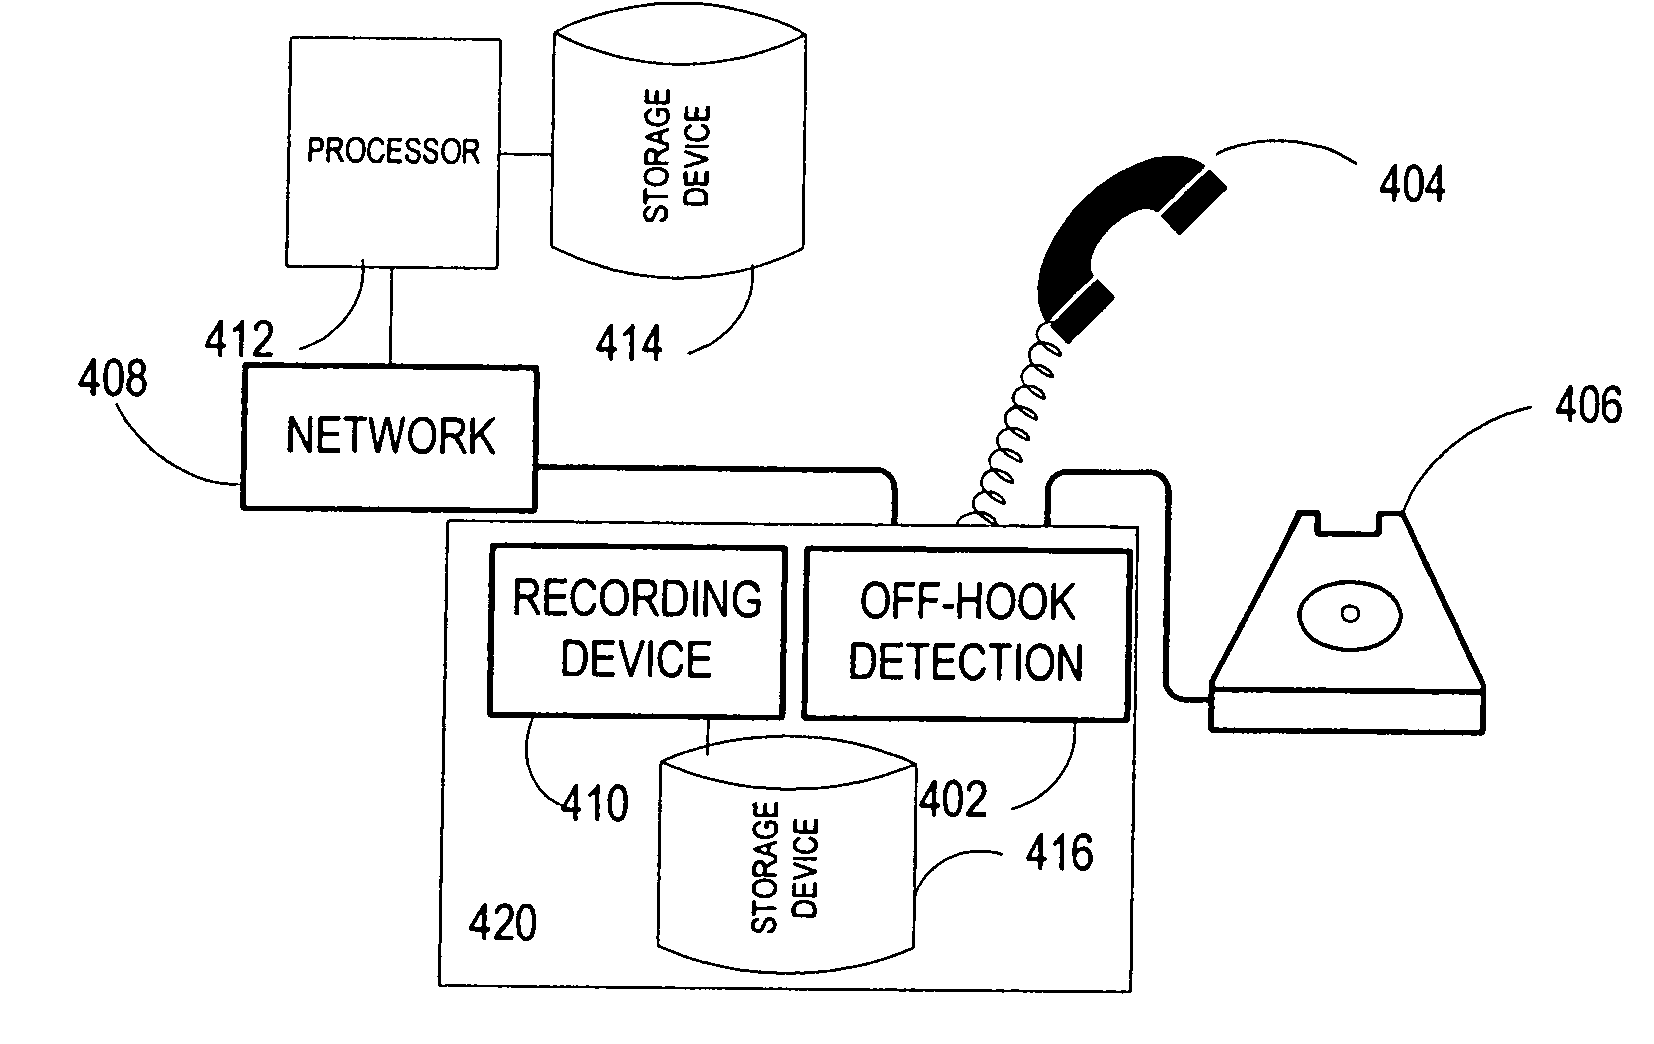 Off-hook detection system, method, and computer program product